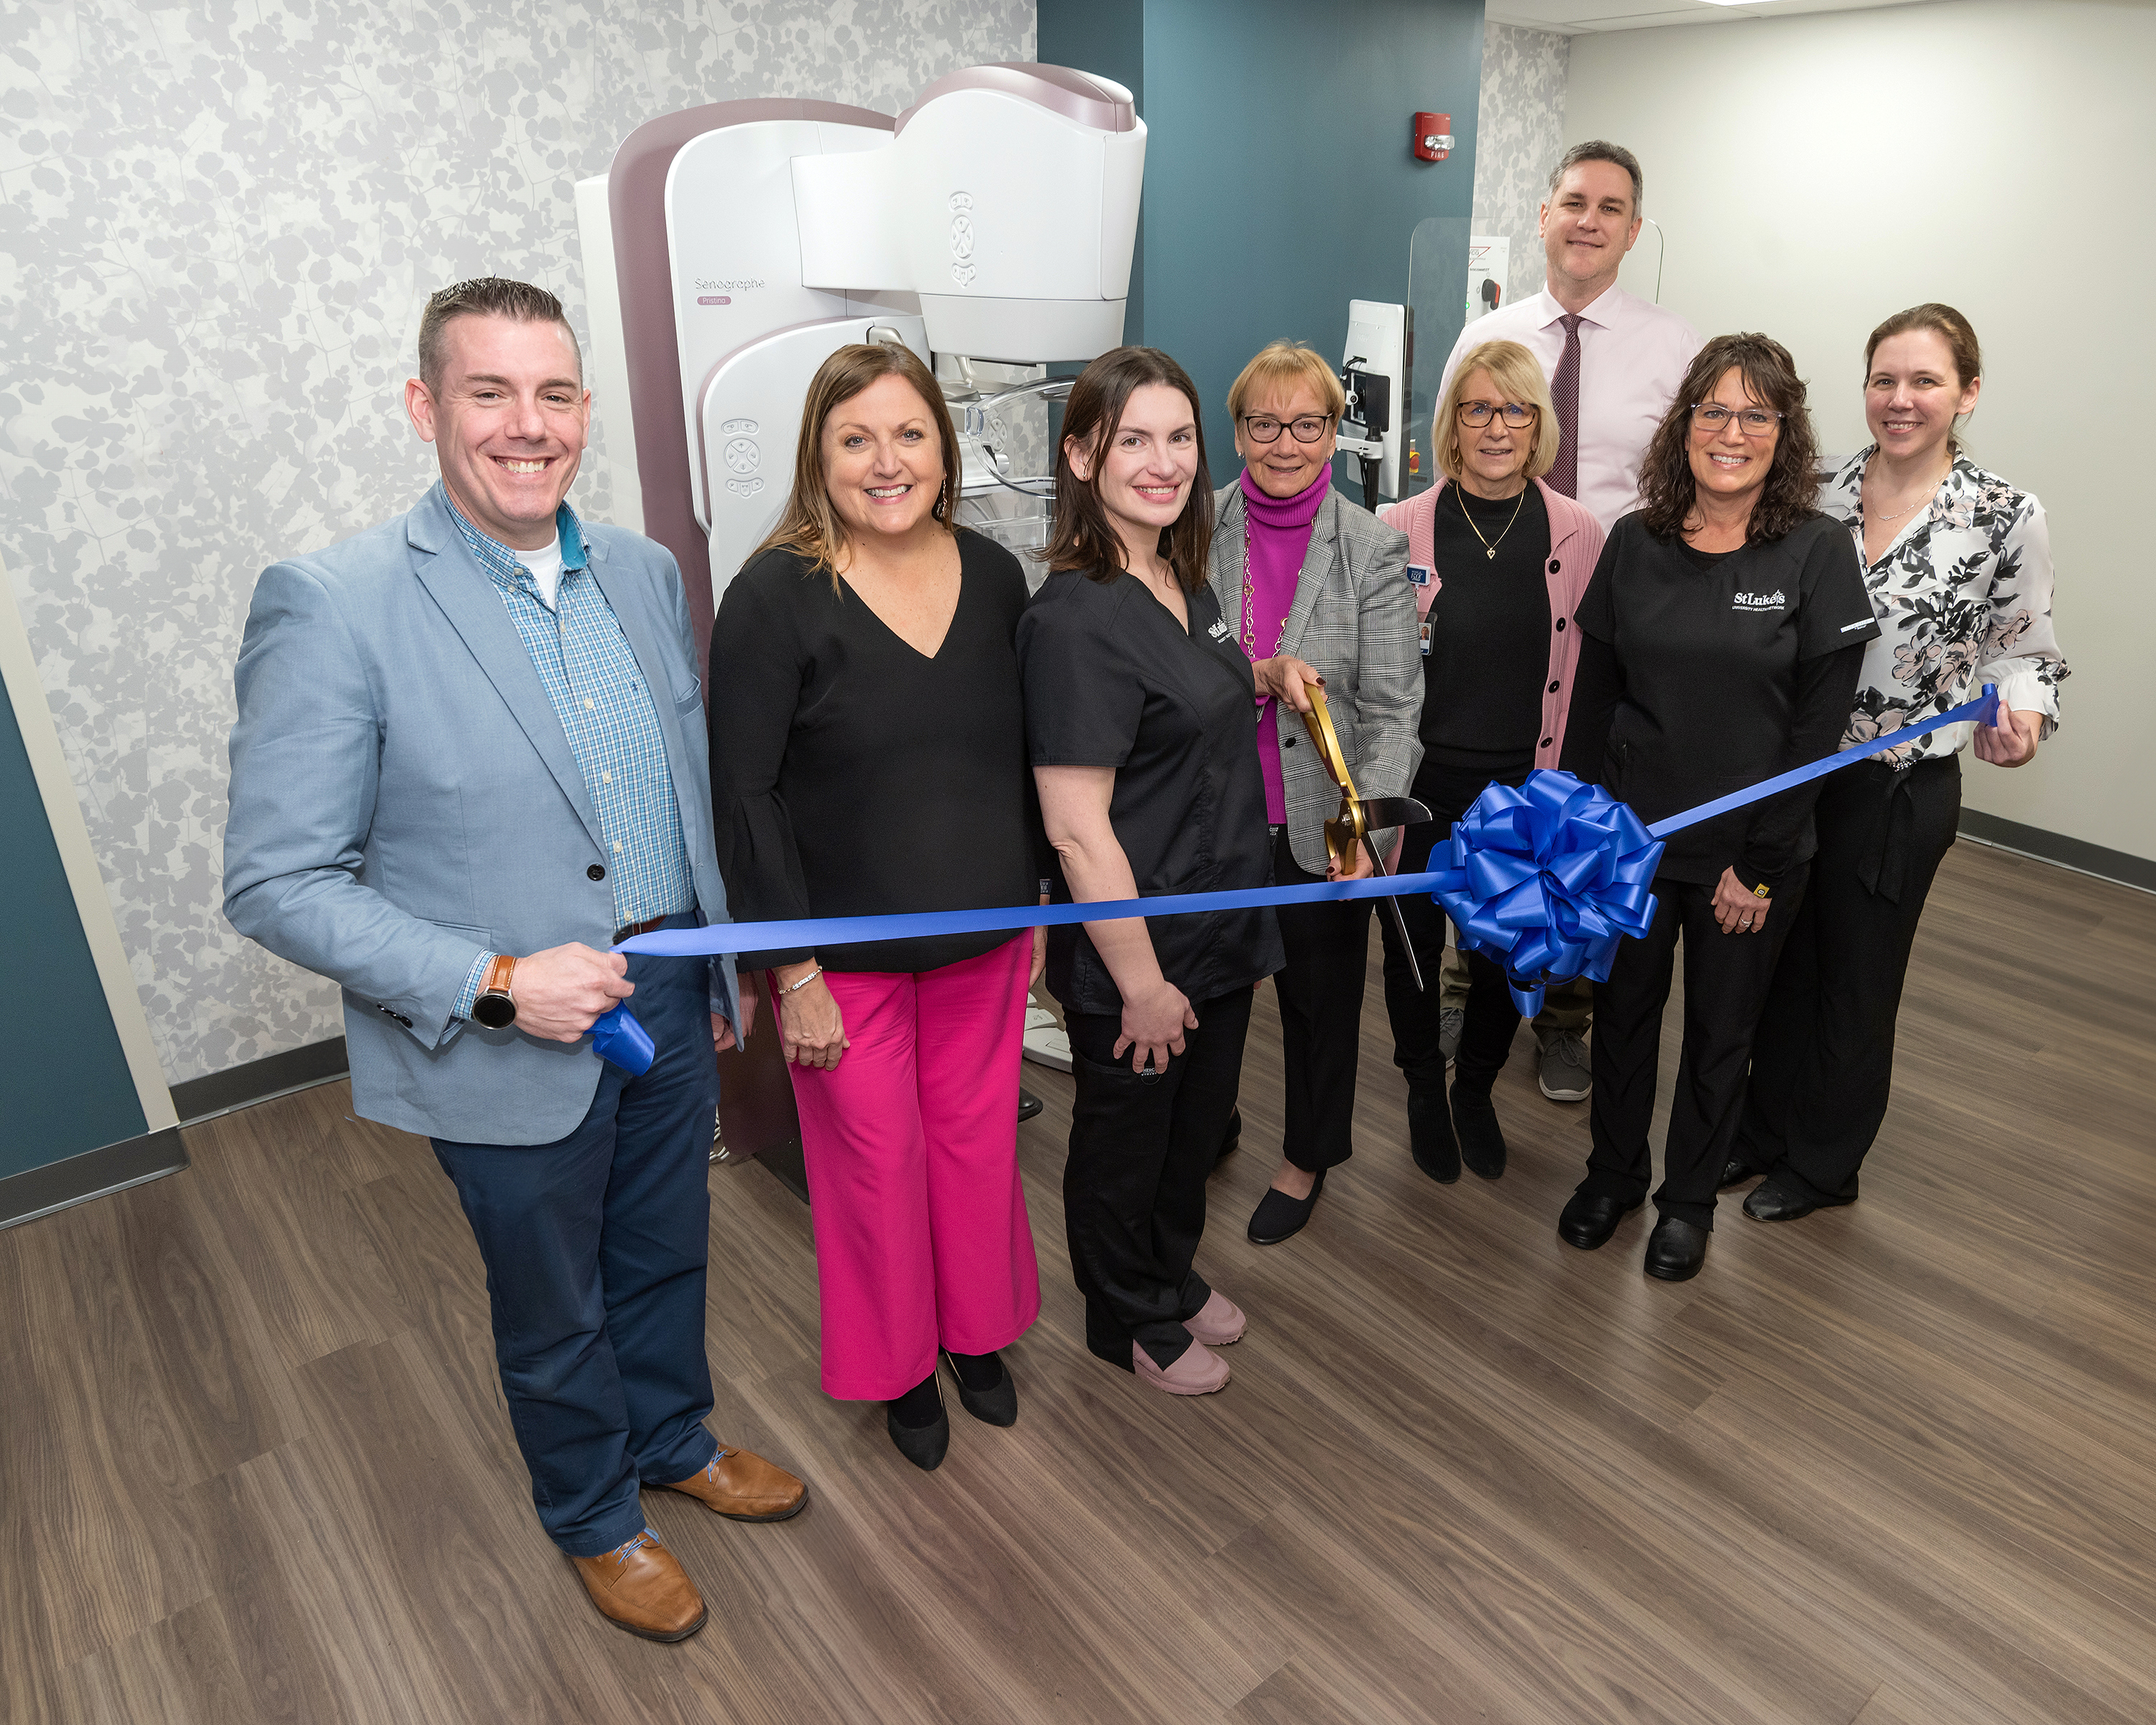 New Imaging Center for Women at the Easton Campus